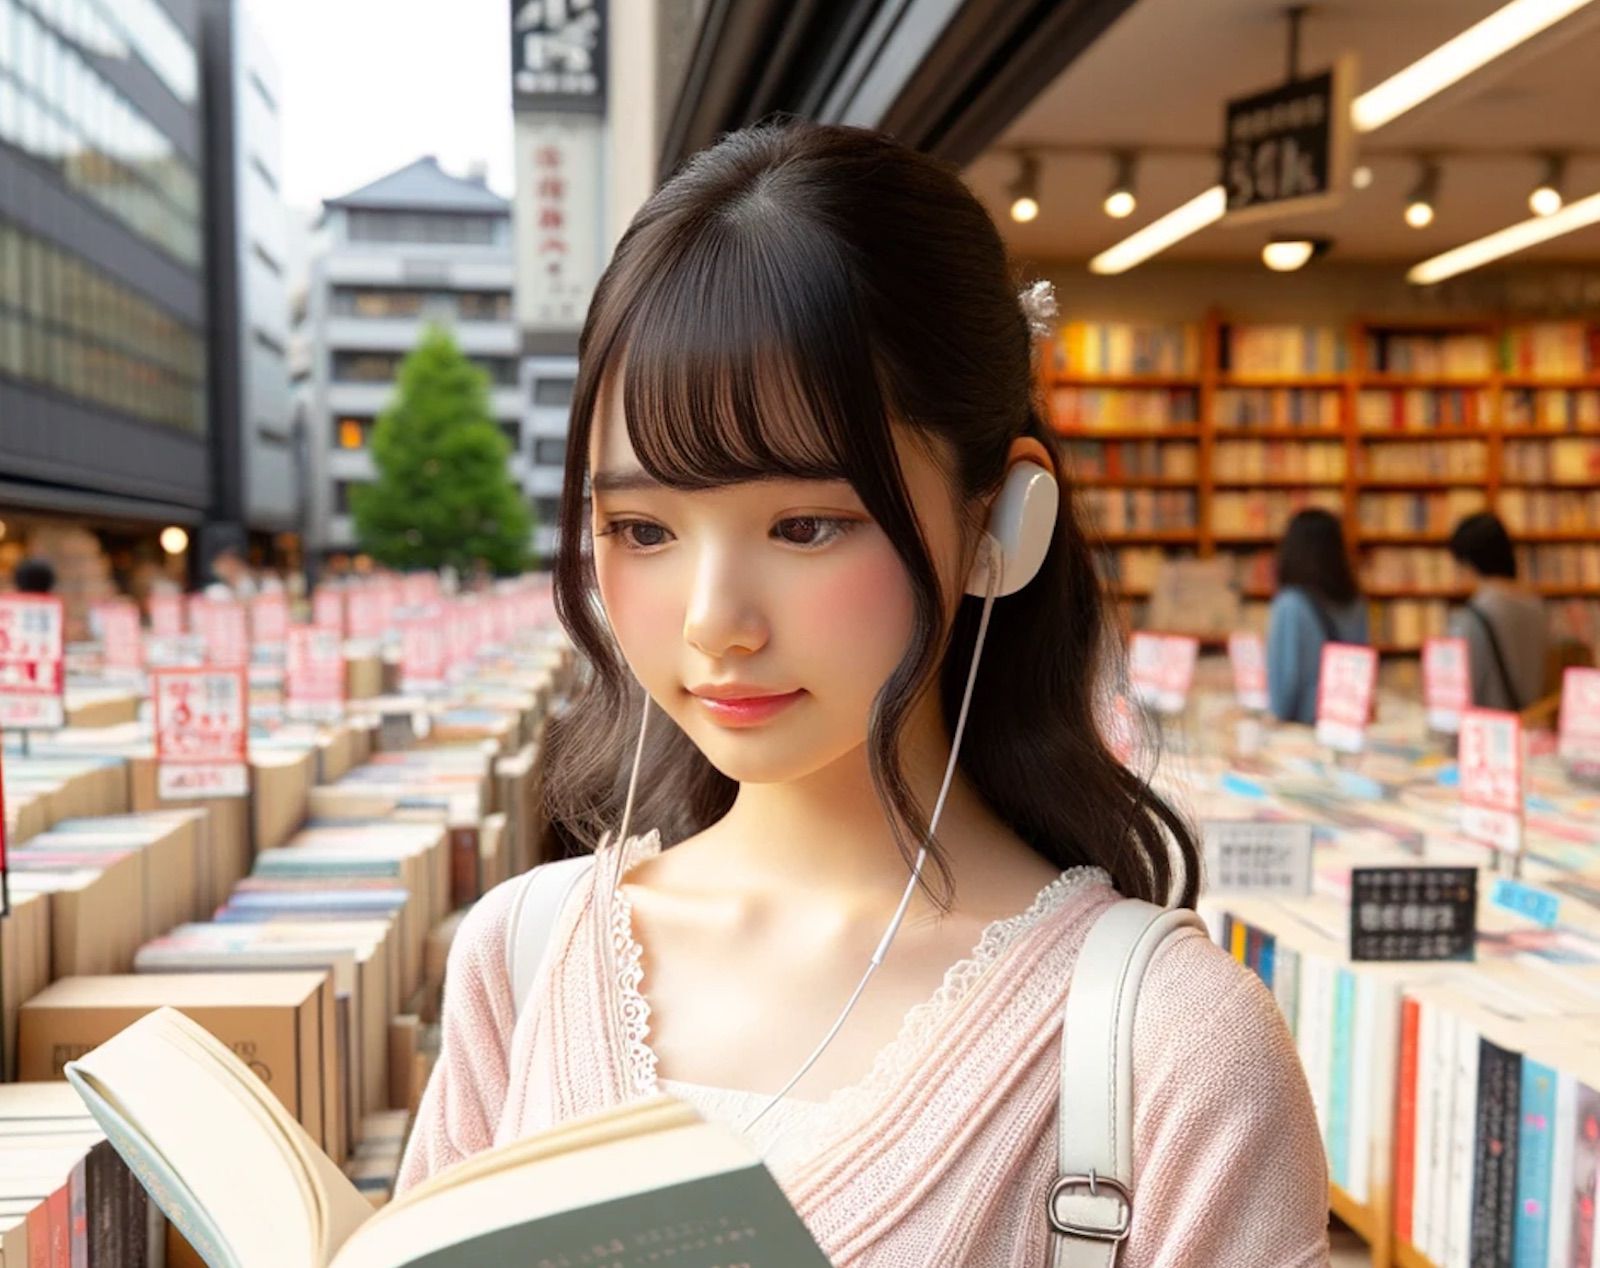 Image of a girl reading a book infront of a bookstore